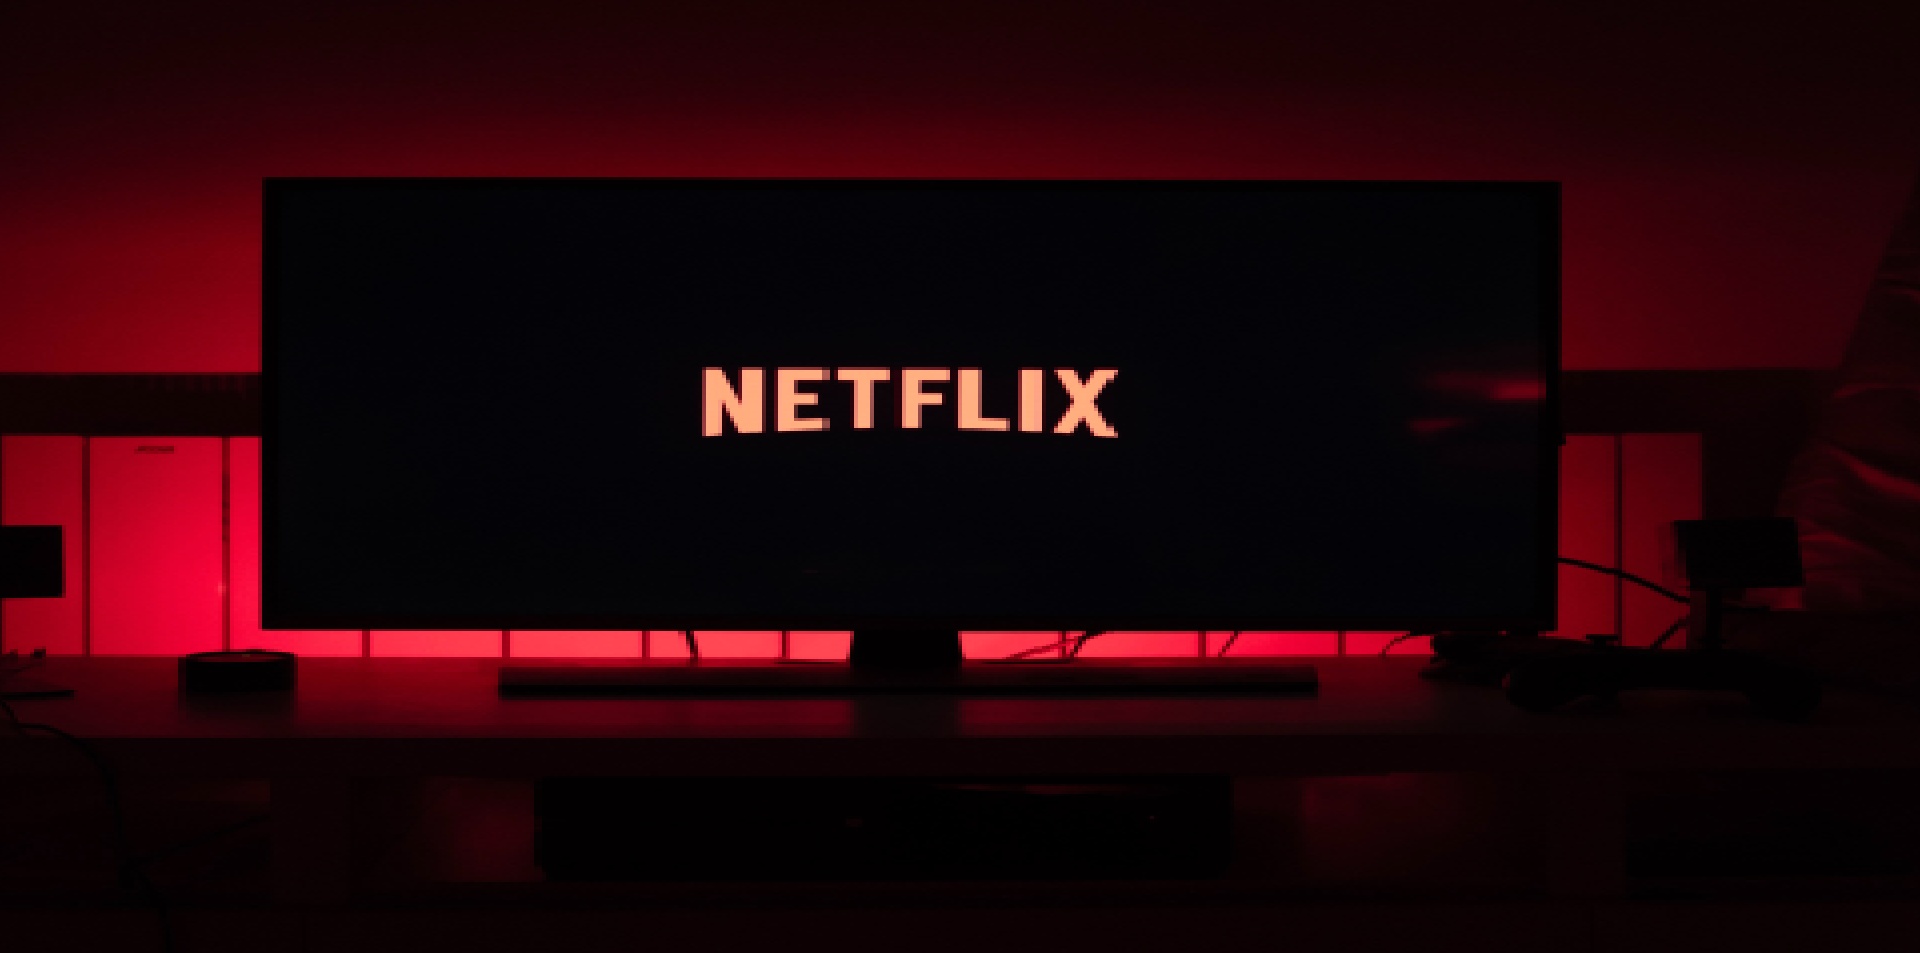 Netflix Price Increase Could Fuel Faster Growth